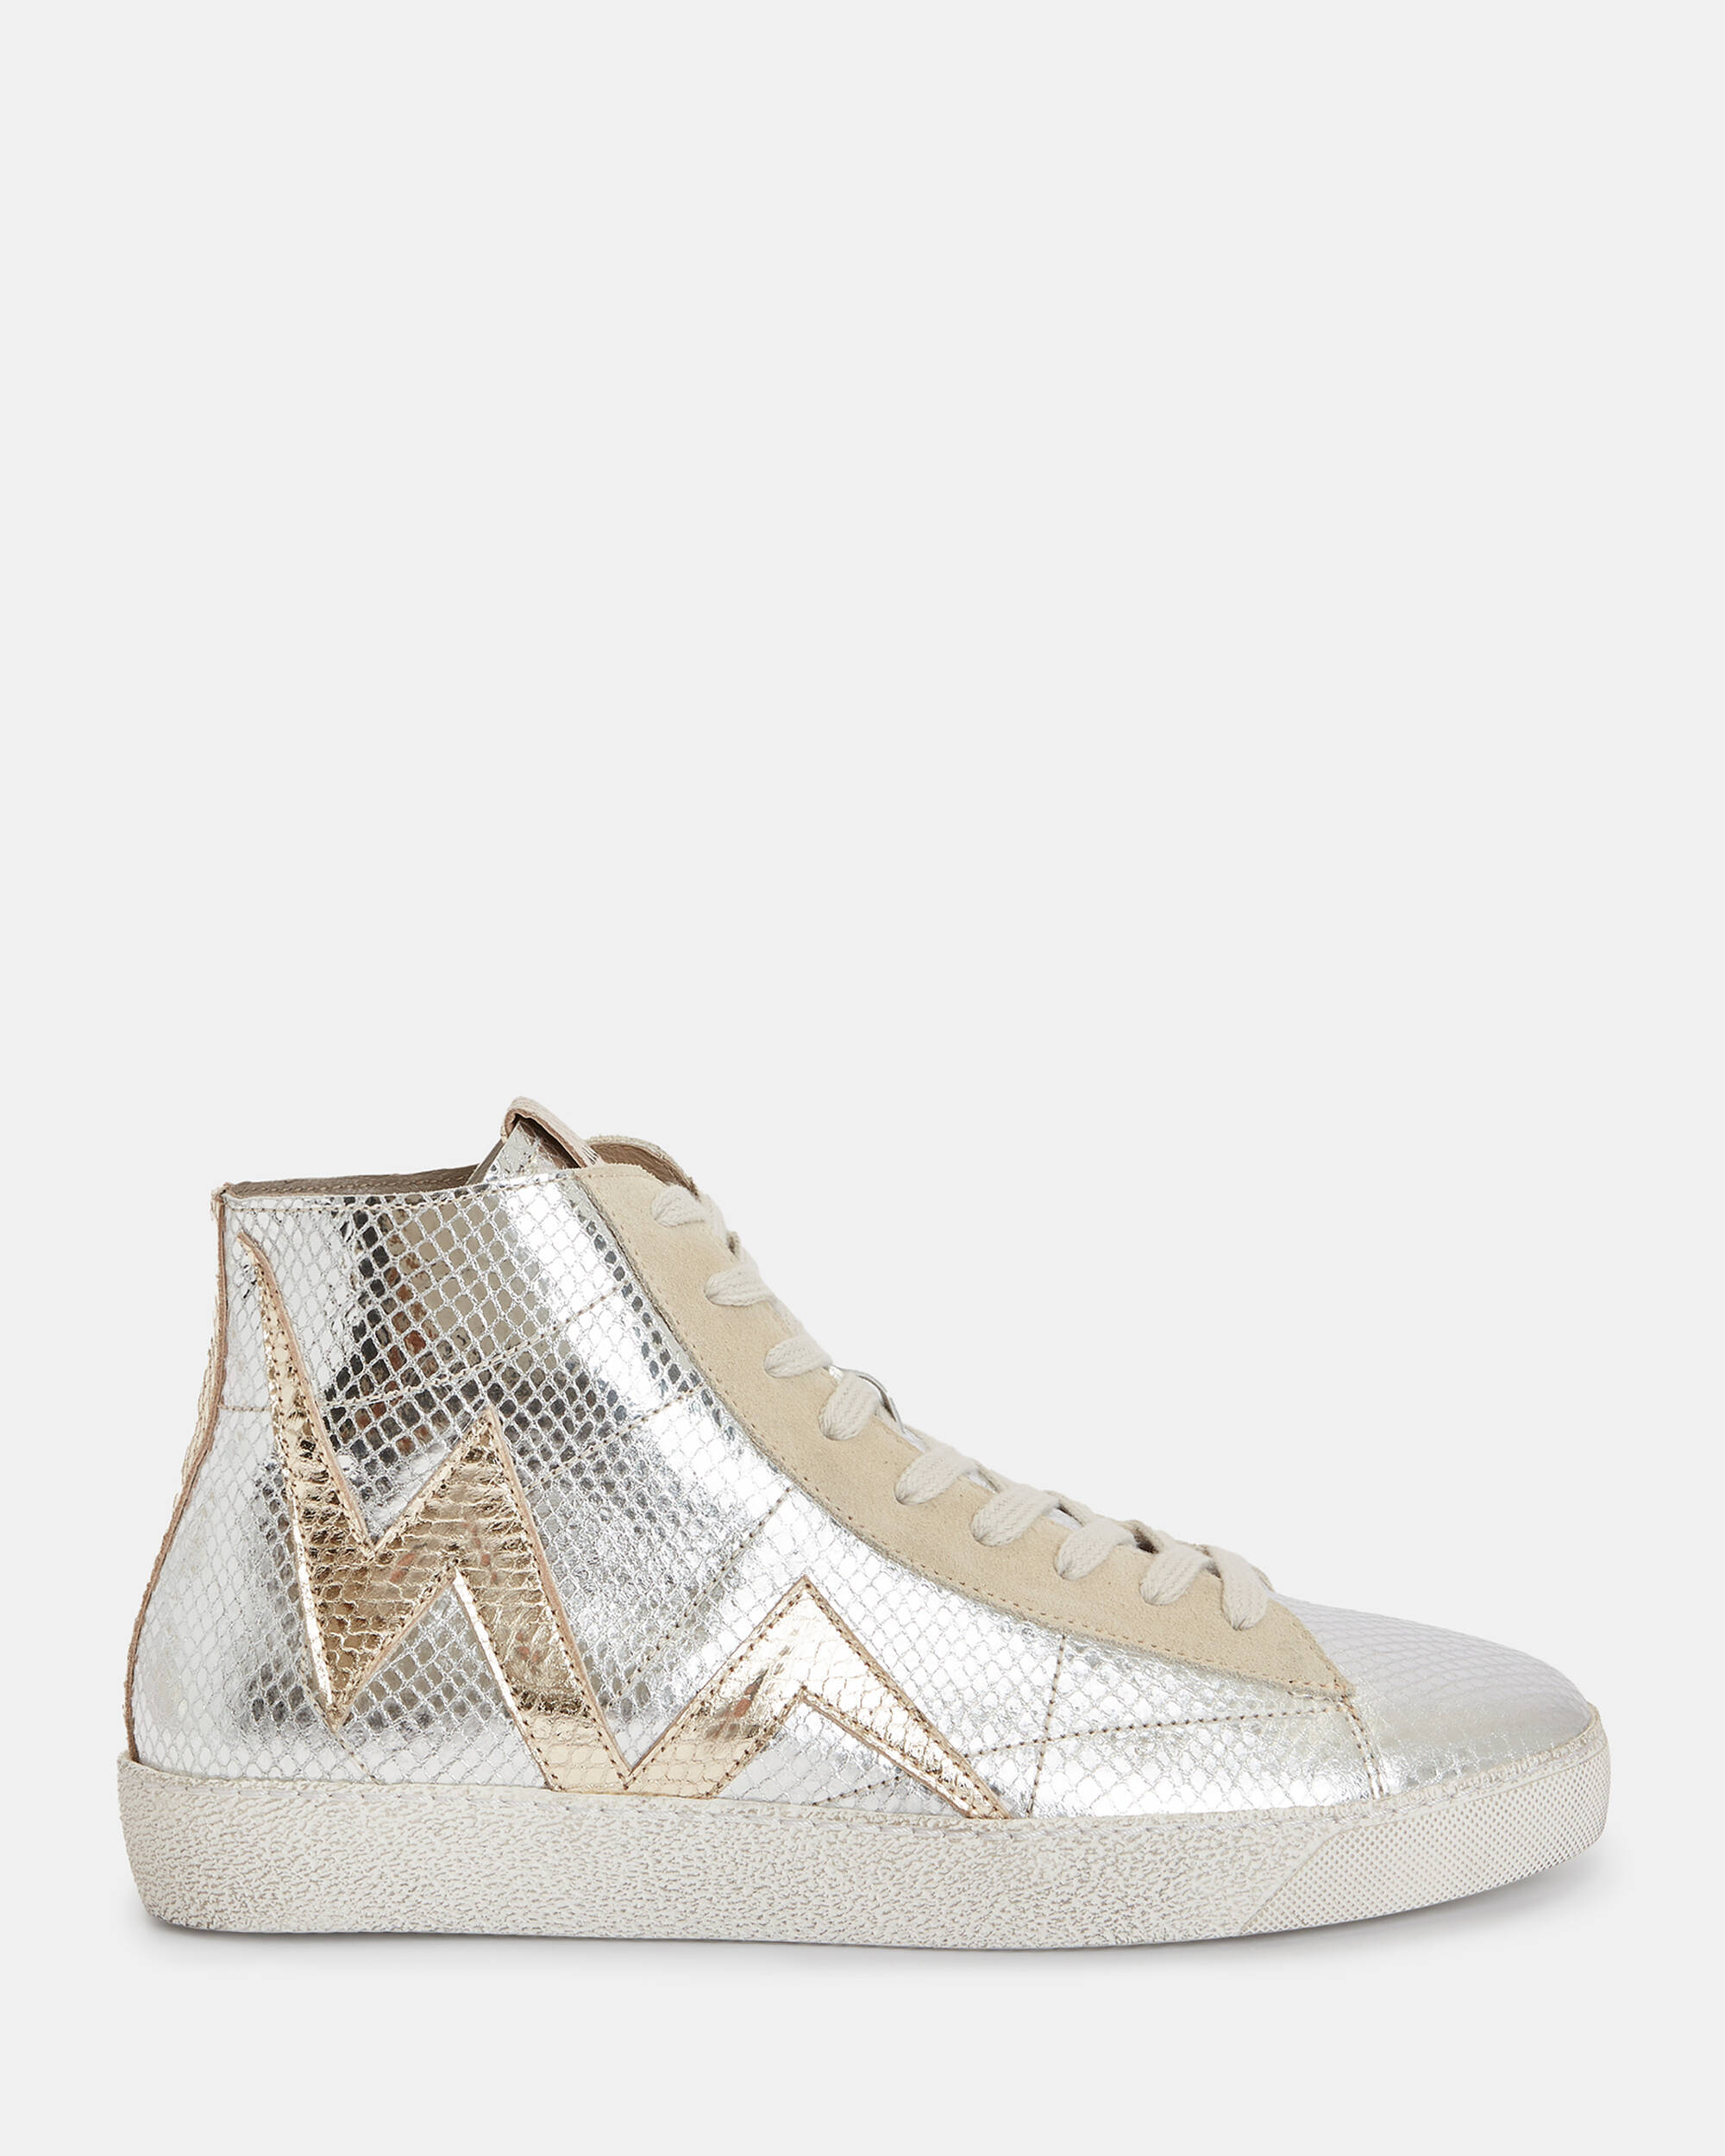 Tundy Bolt Metallic Leather Trainers